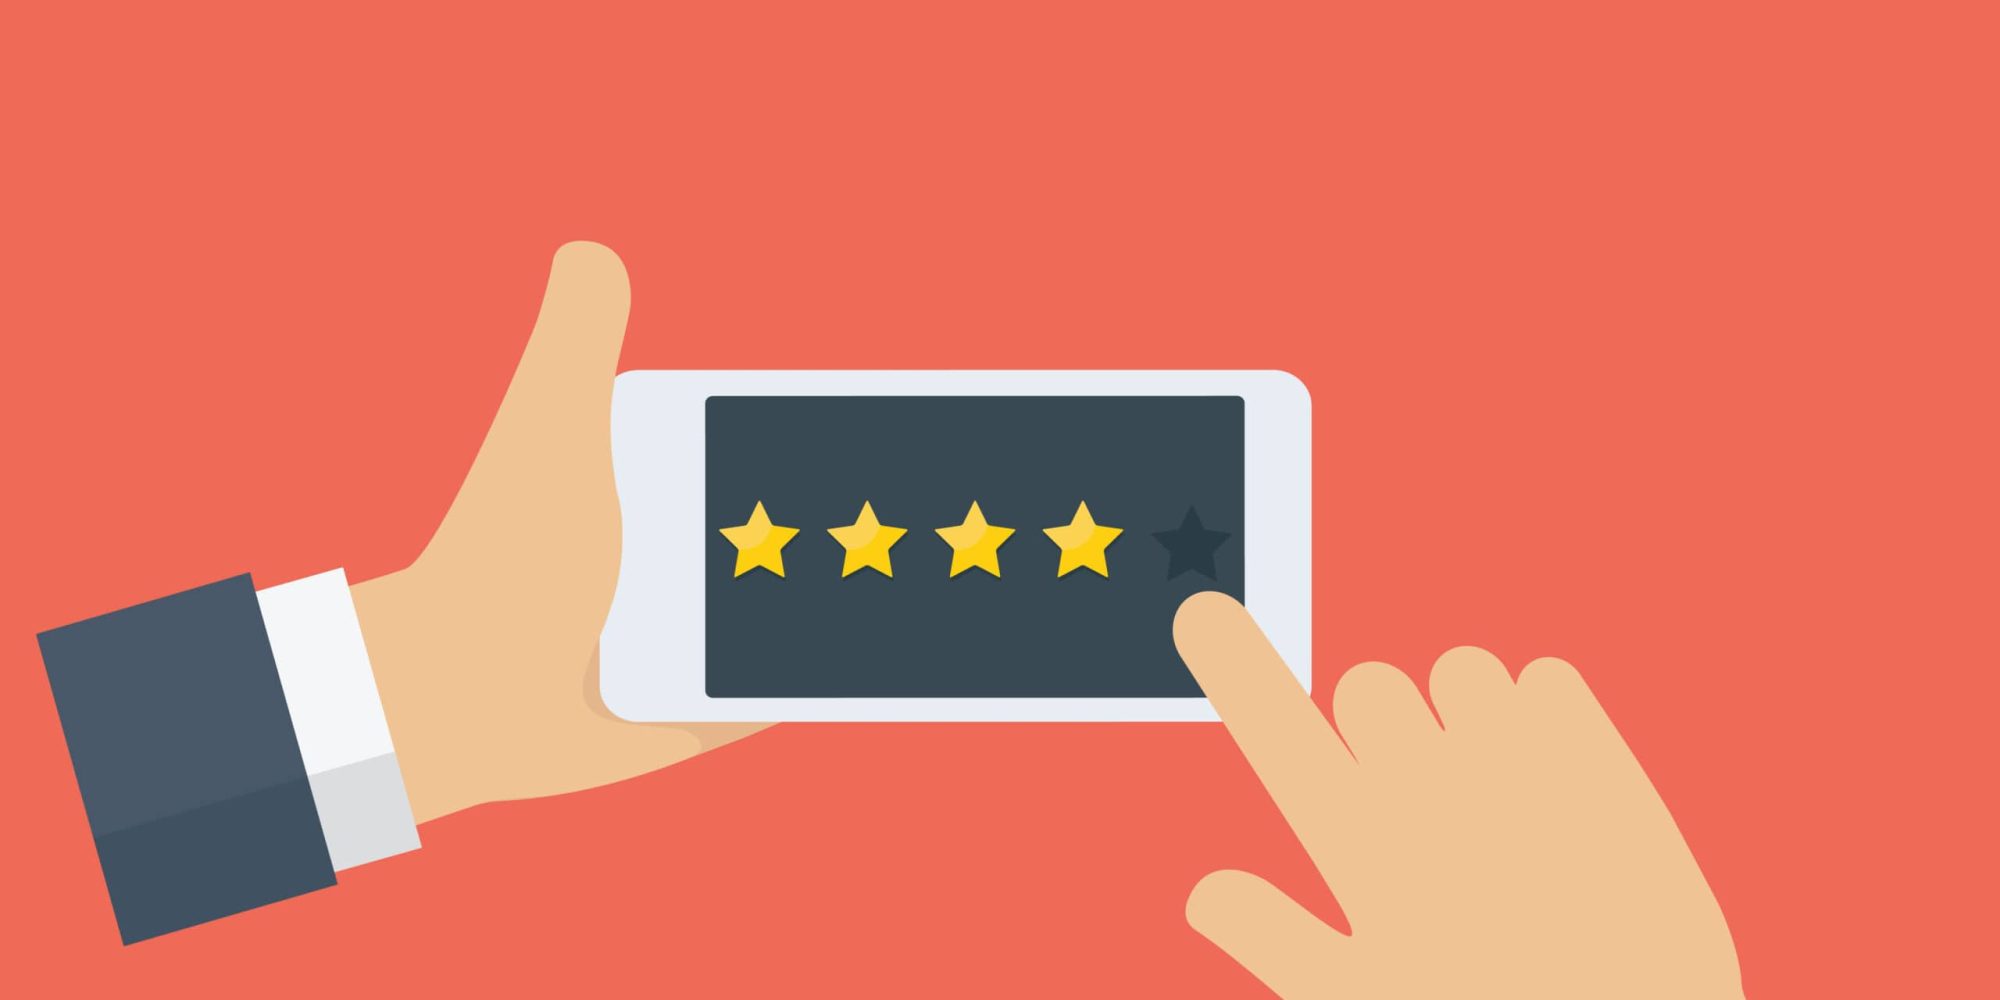 People hand giving rating star on mobile phone